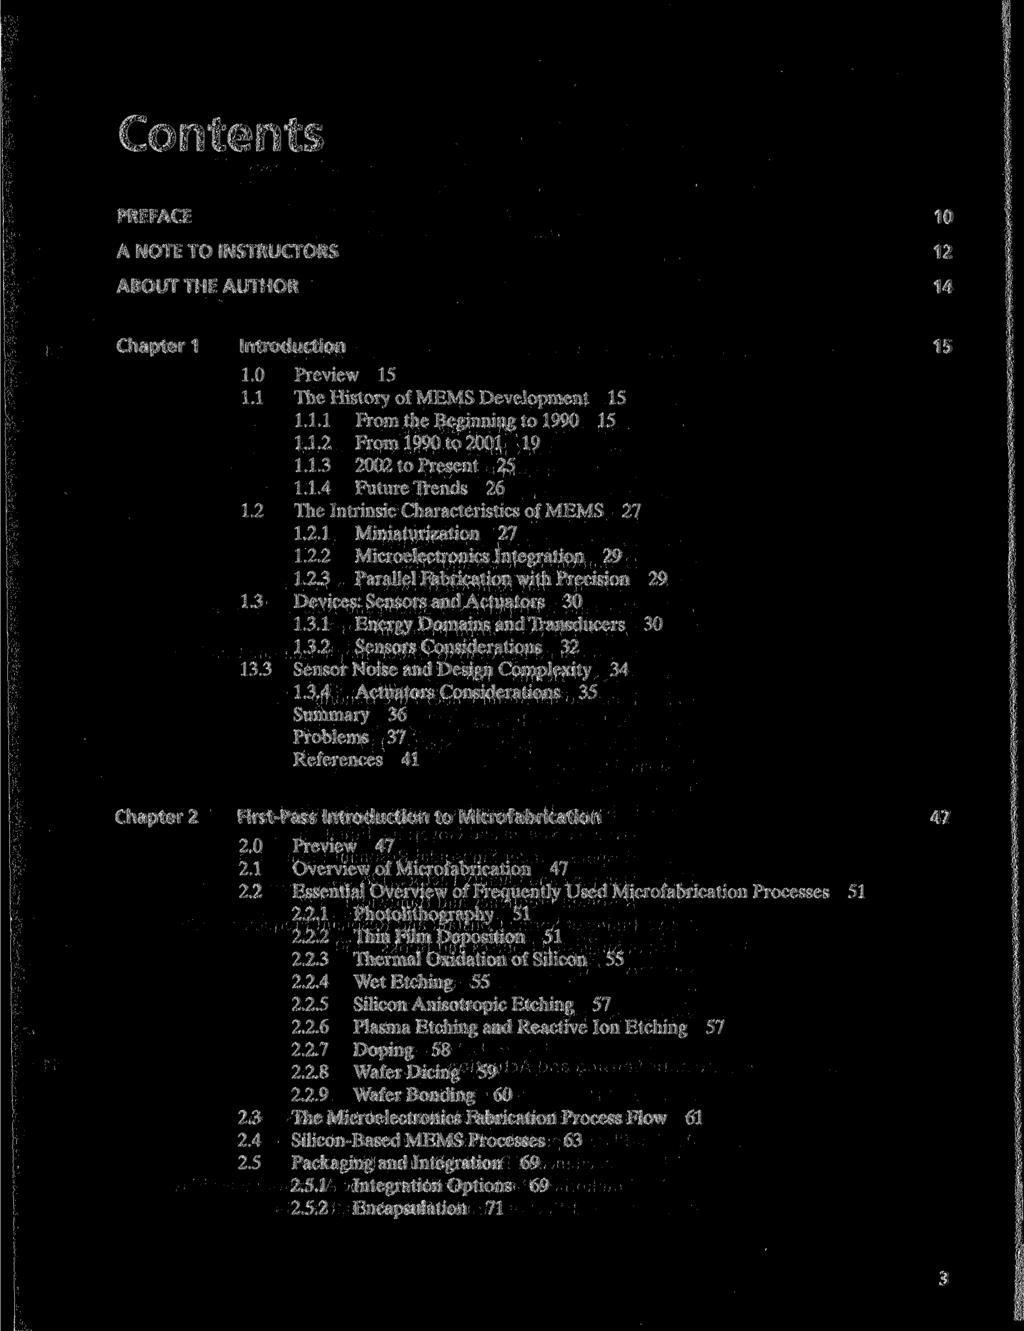 Contents PREFACE 10 A NOTE TO INSTRUCTORS 12 ABOUT THE AUTHOR 14 Chapter 1 Introduction 15 1.0 Preview 15 1.1 The History of MEMS Development 15 1.1.1 From the Beginning to 1990 15 1.1.2 From 1990 to 2001 19 1.